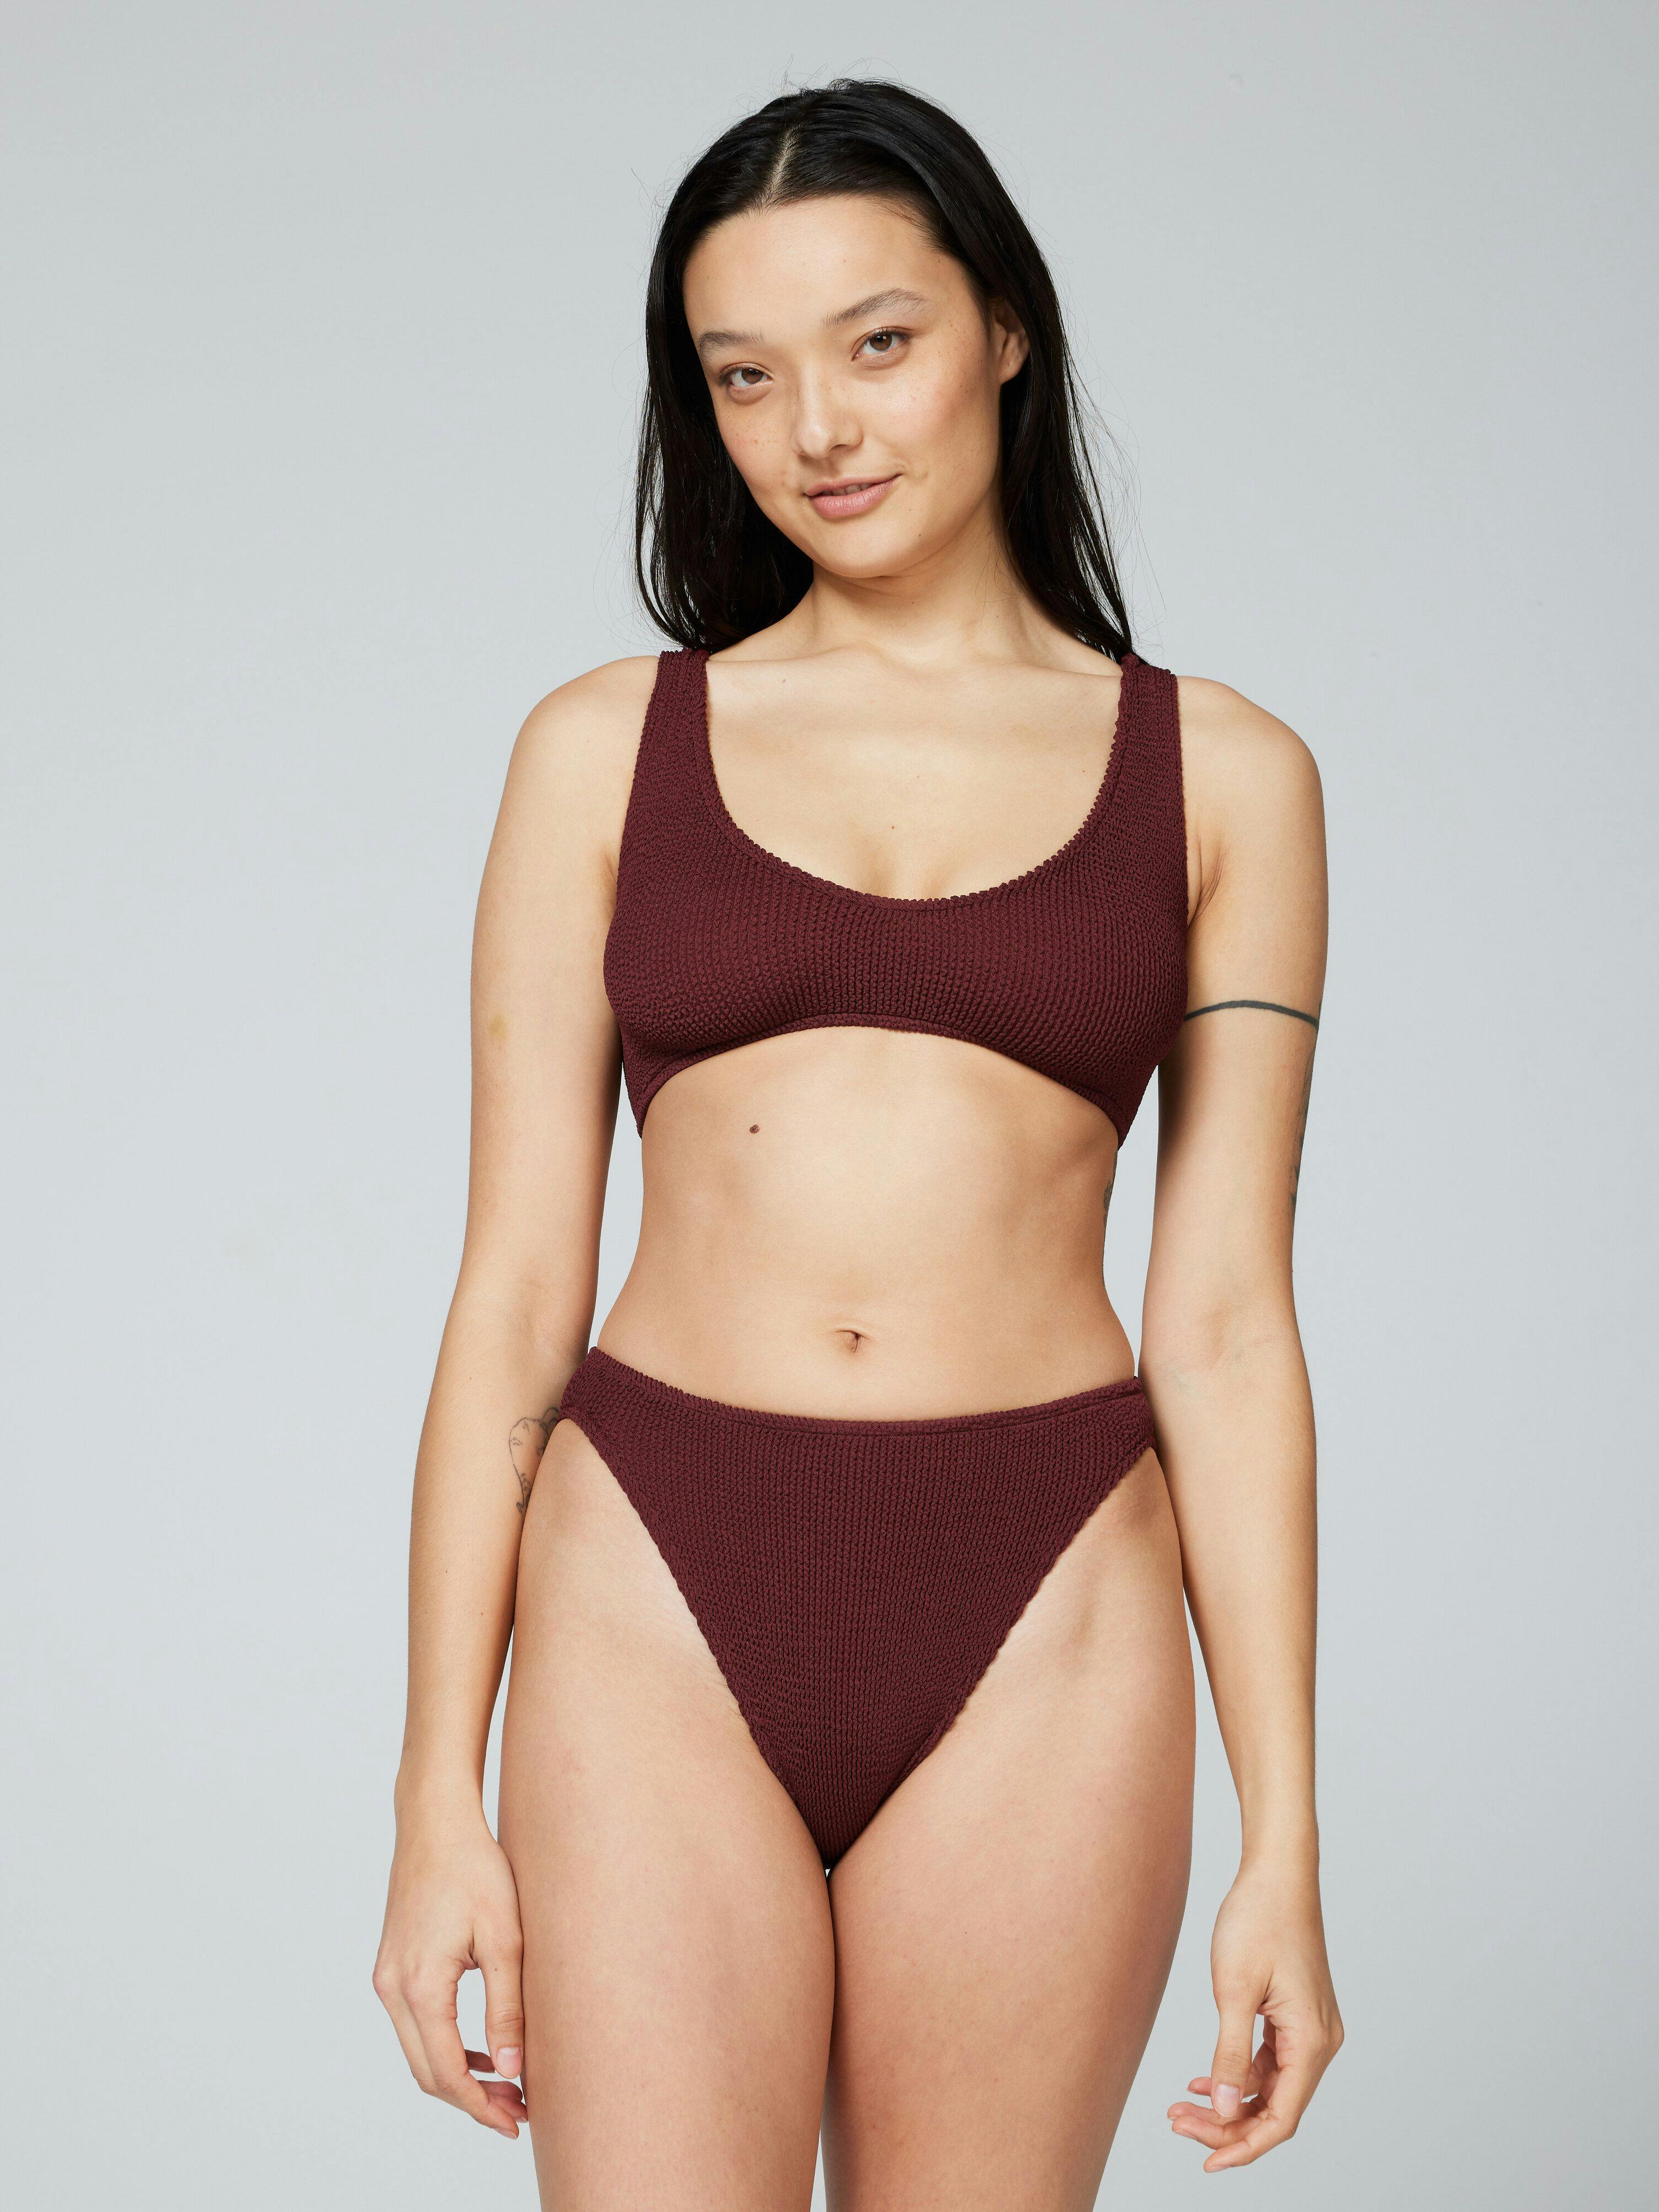 These Women's 2 Piece Sets for Vacation Are So Fashionable and